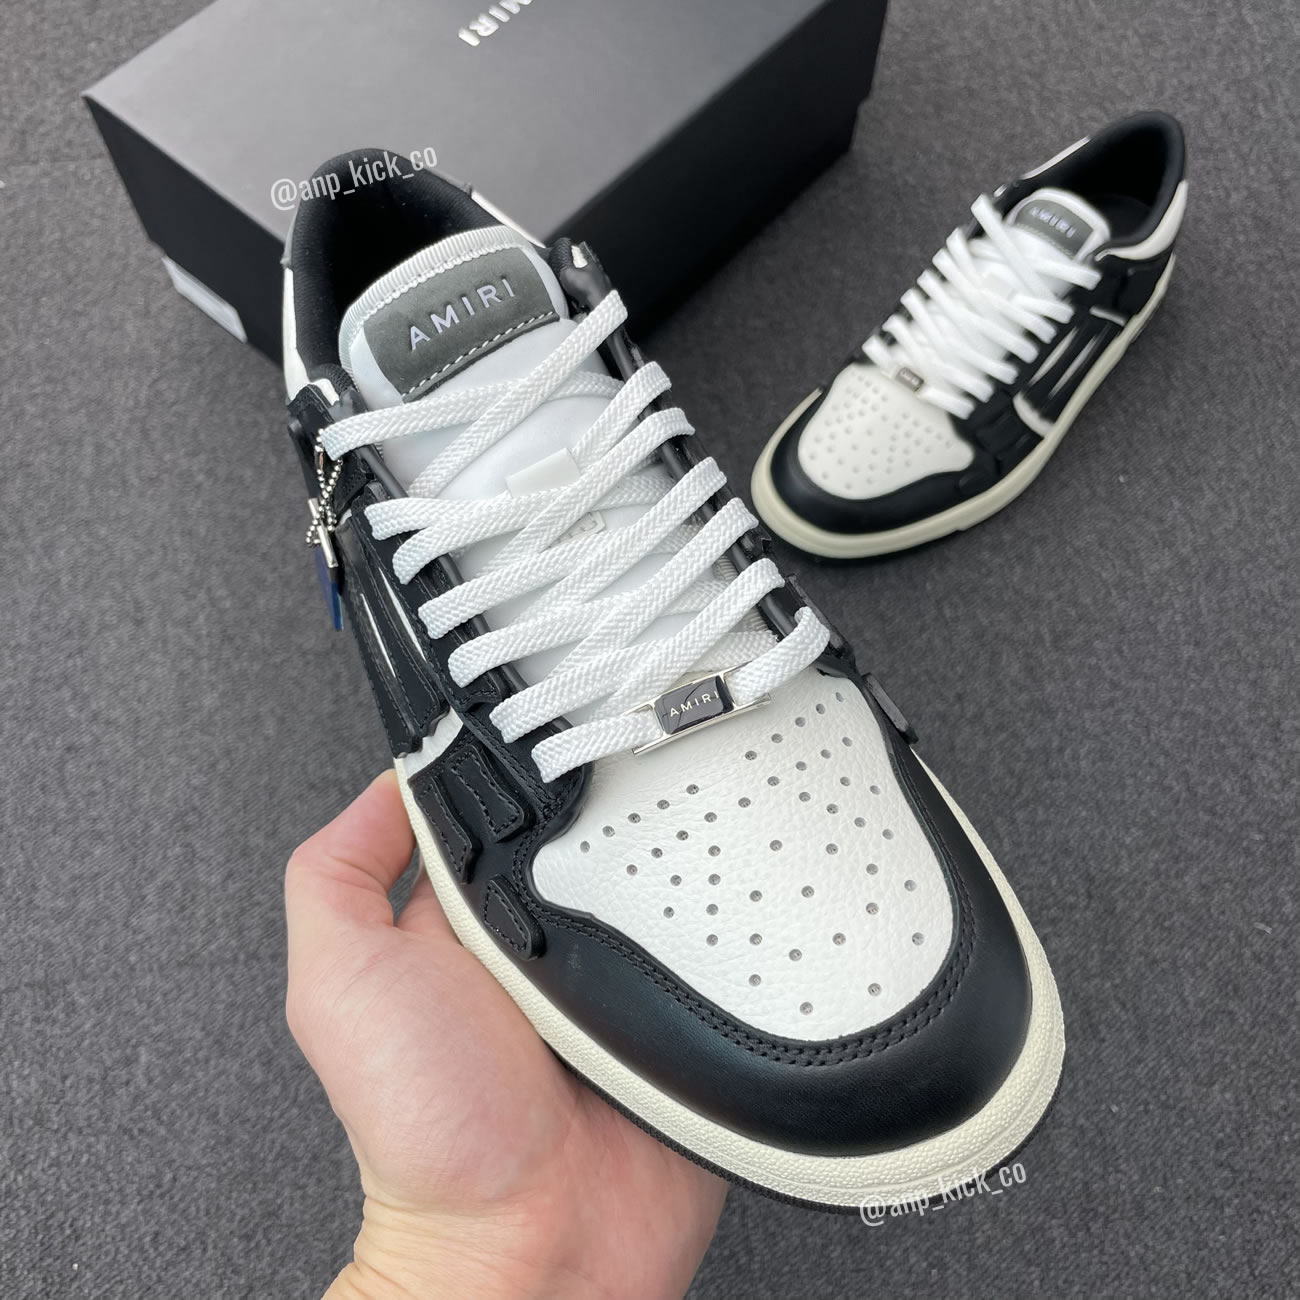 A M I R I Skel Top Low Leather Sneakers Black White Anpkick Mfs003 004 (2) - newkick.org